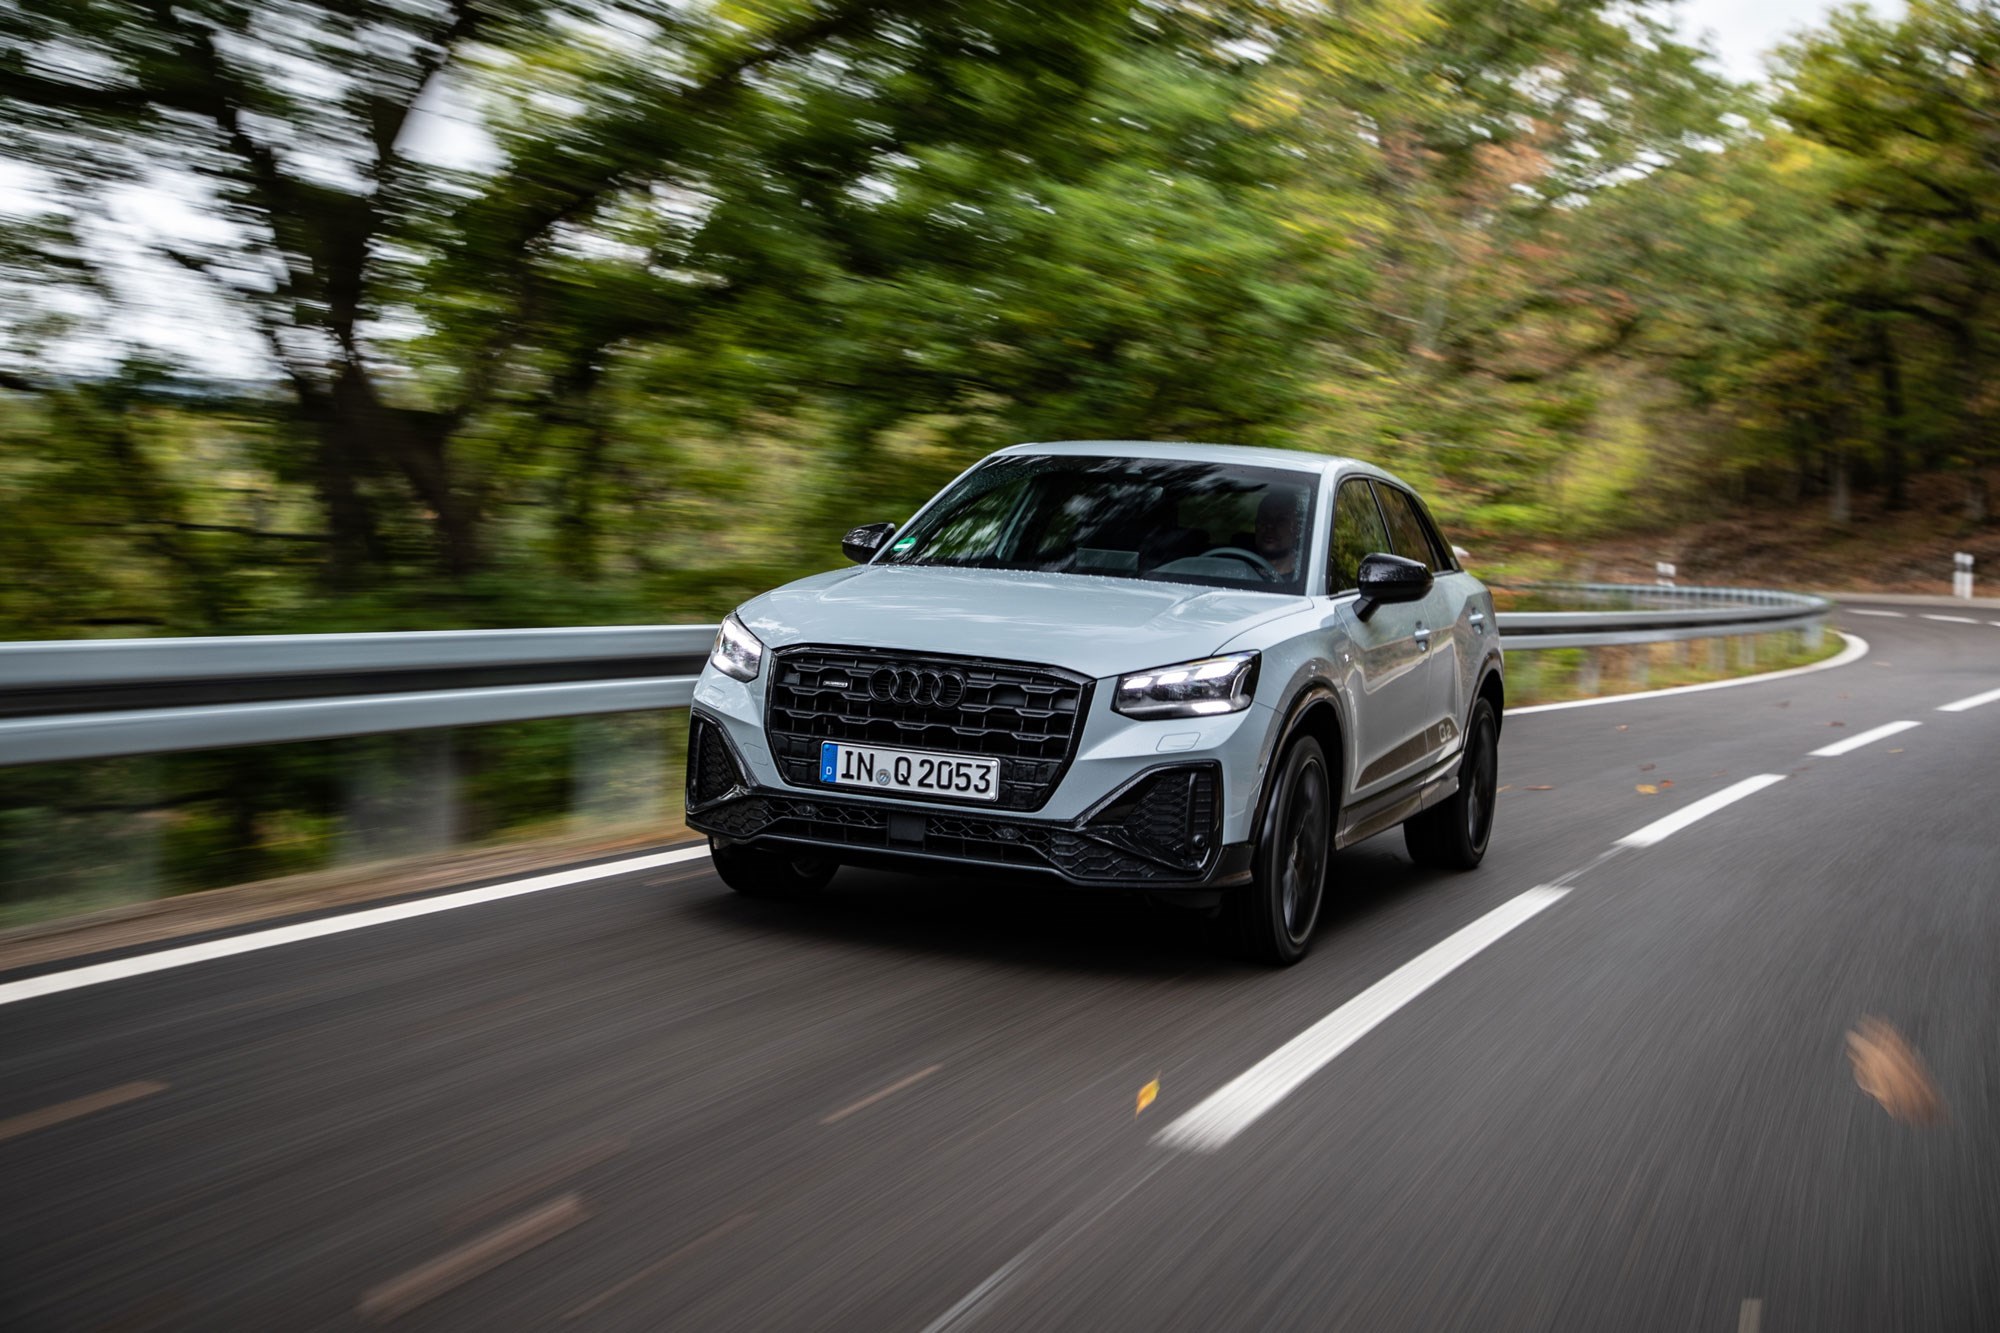 Audi Q2 facelift review: blink and you'll miss it